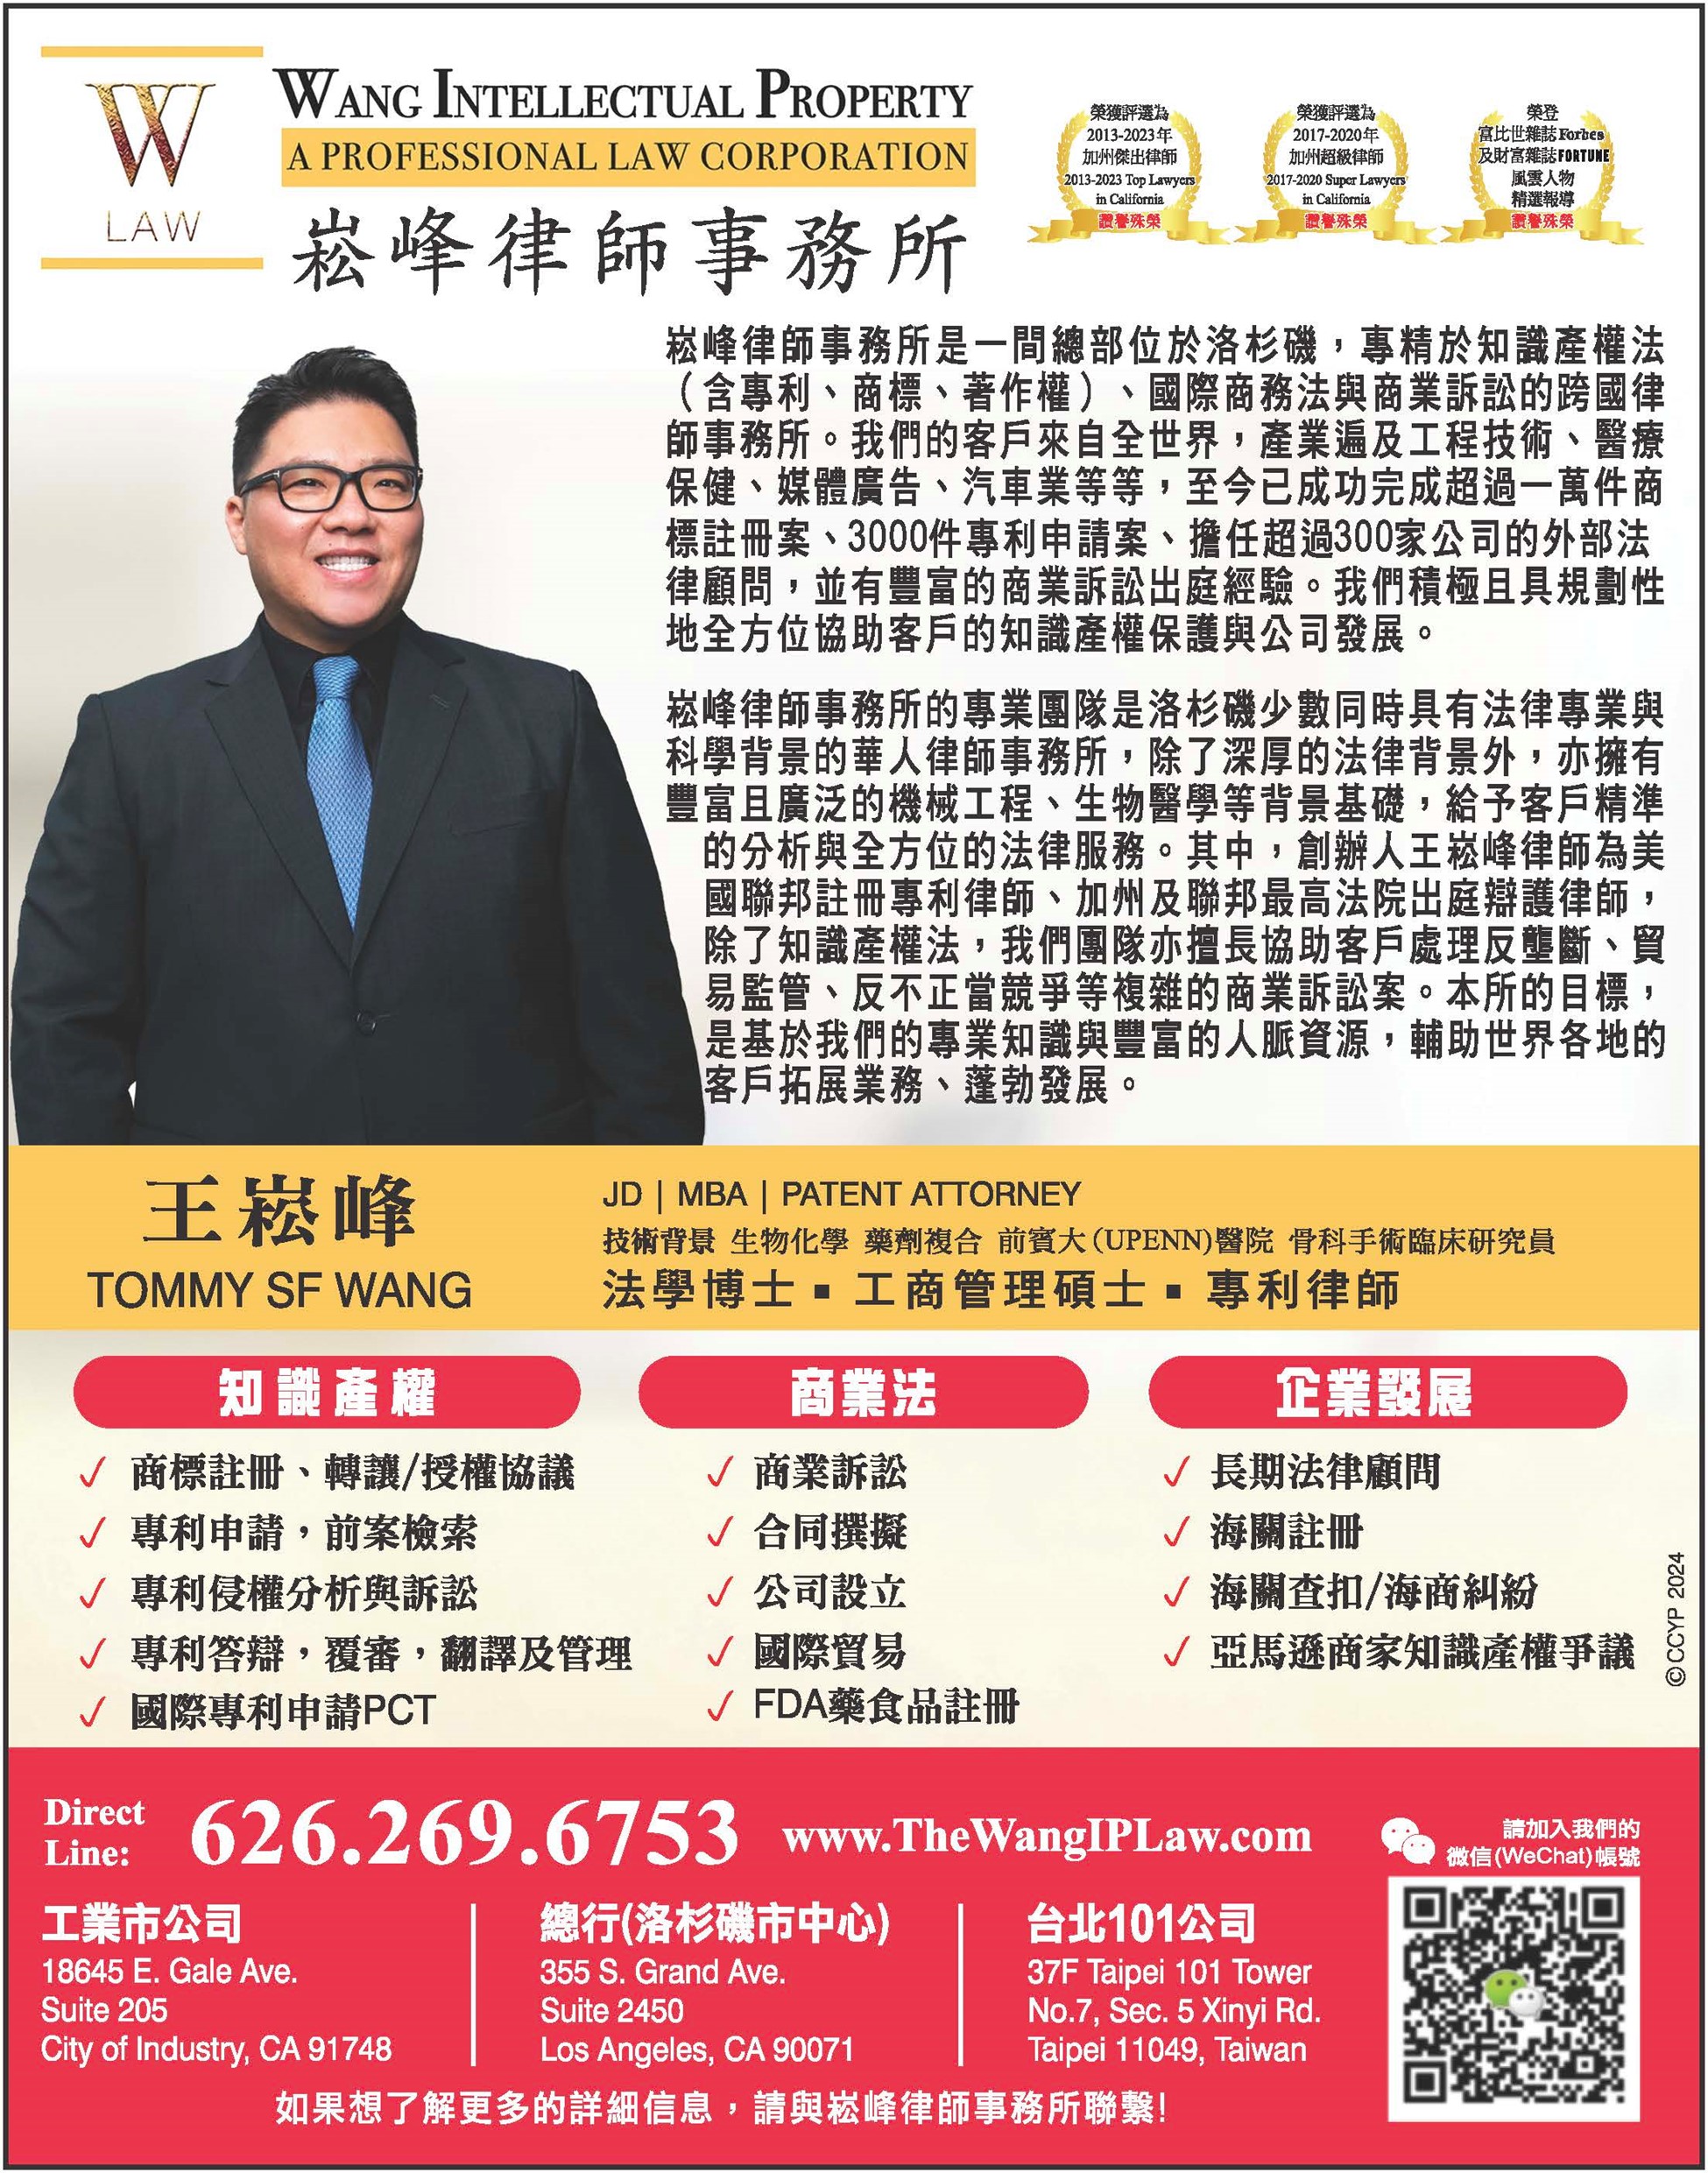 Wang Intellectual Property | A Professional Law Corporation | Tommy SF Wang